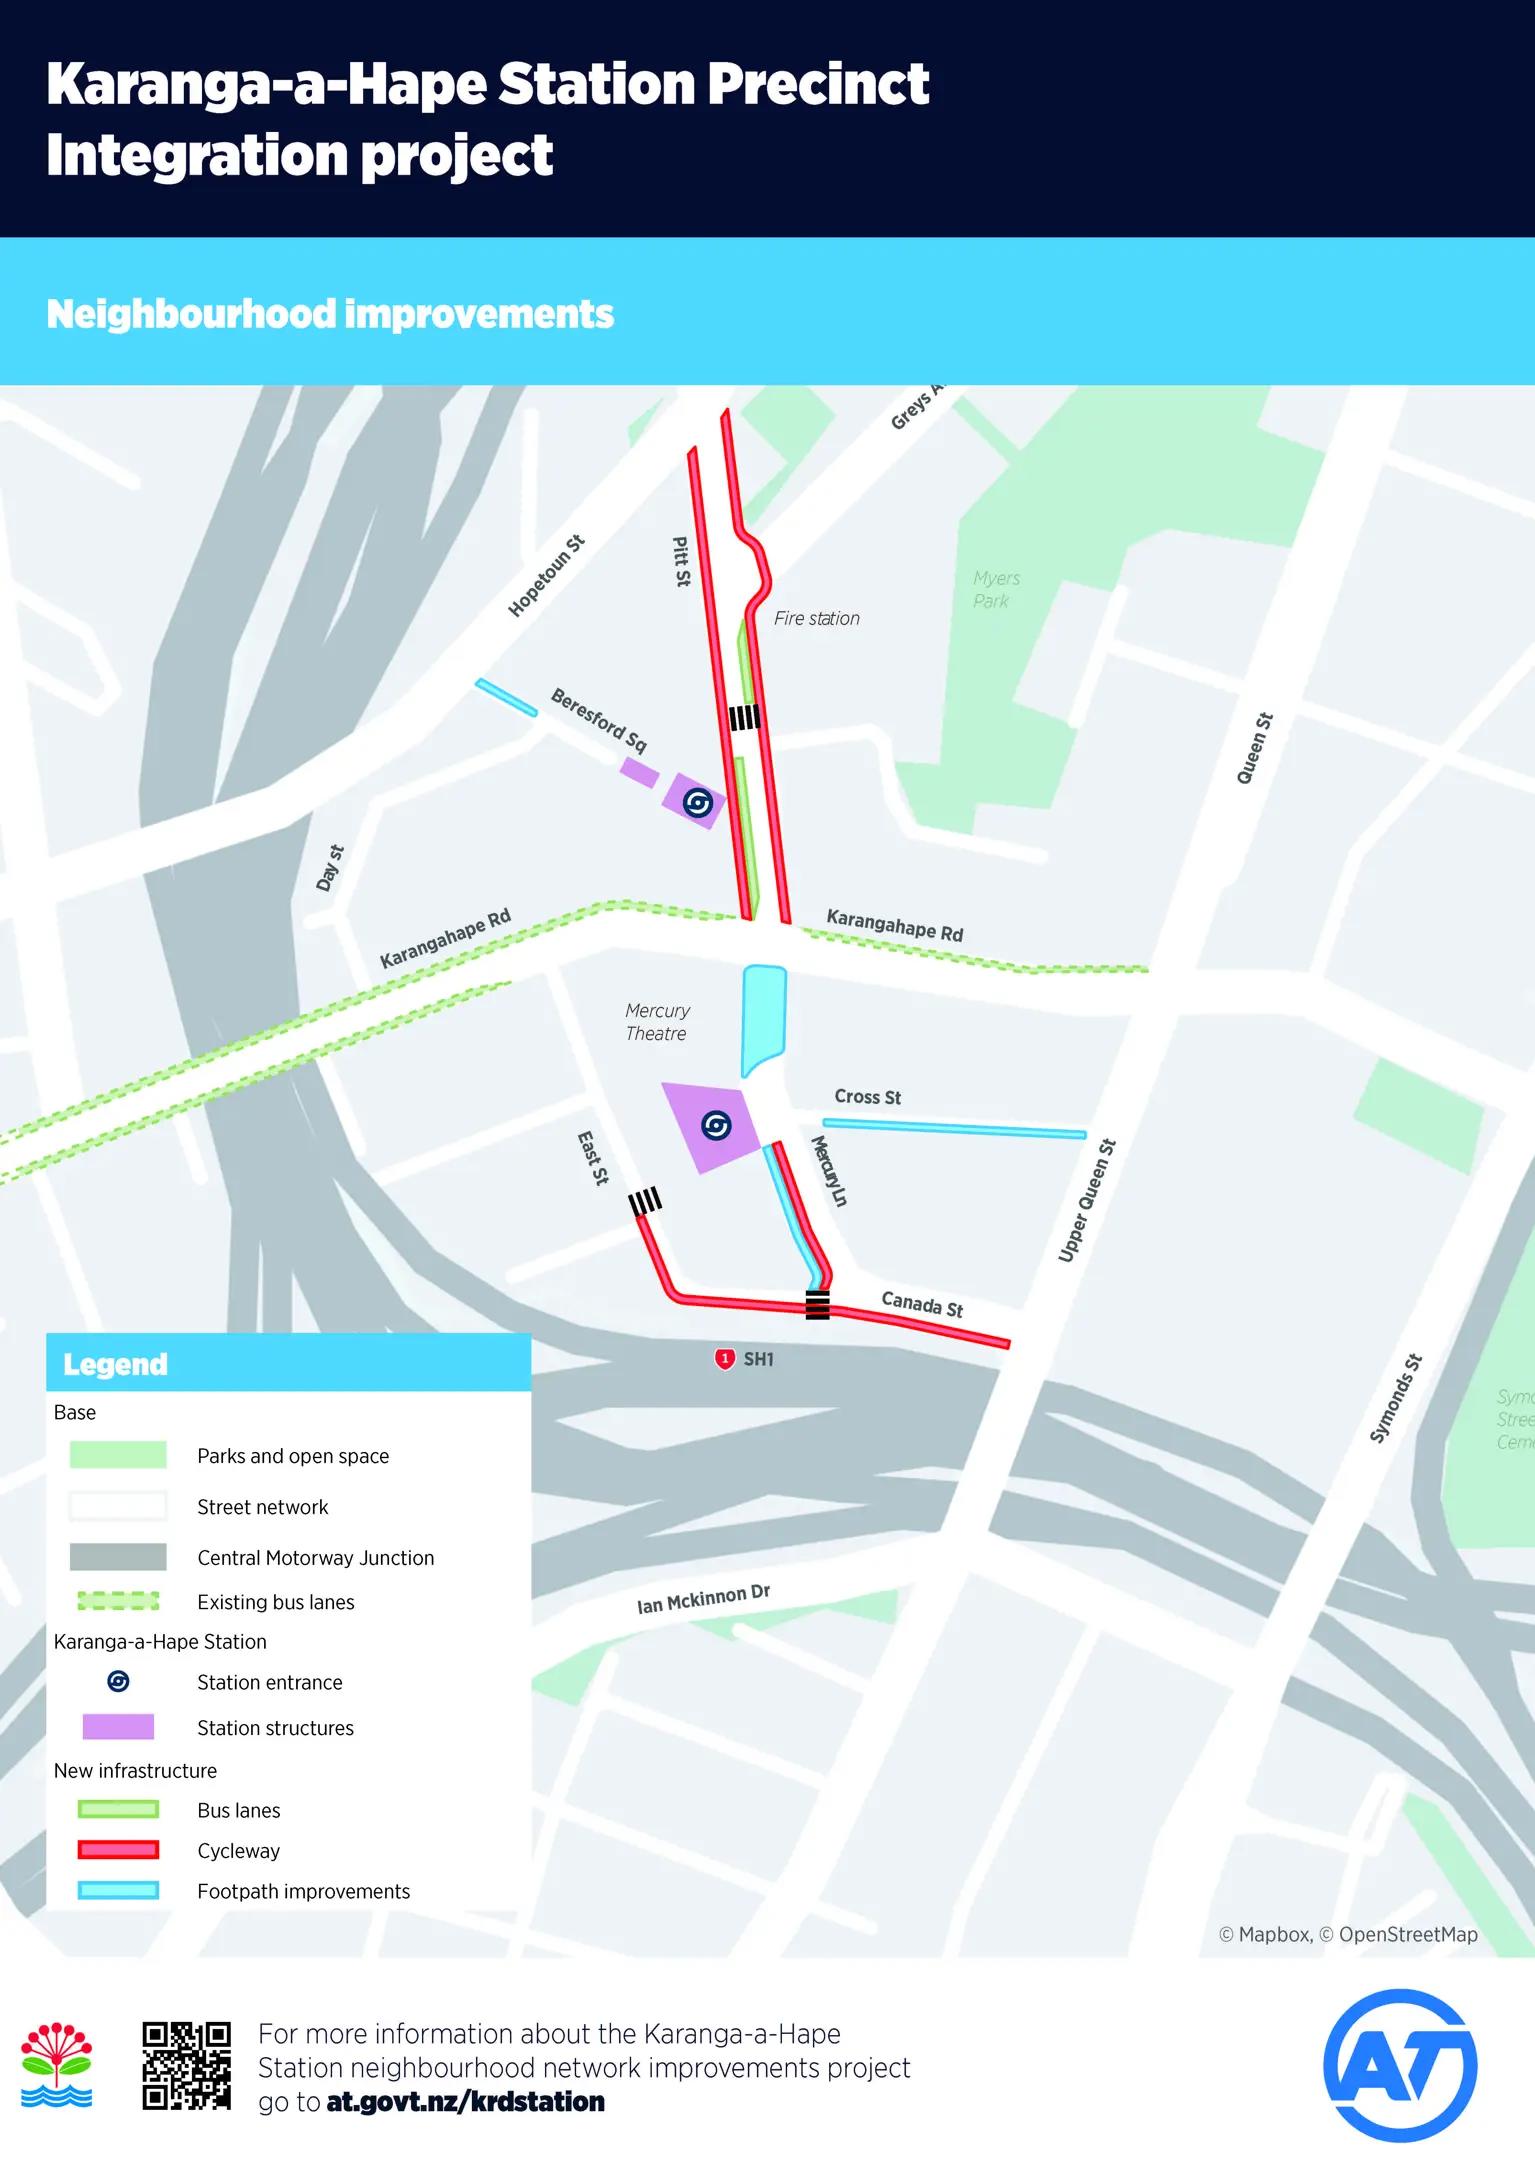 Map of Karanga-a-hape Station precinct showing locations of neighbourhood improvements, including bus lanes marked in green, cycleways in red and footpath improvements in blue.